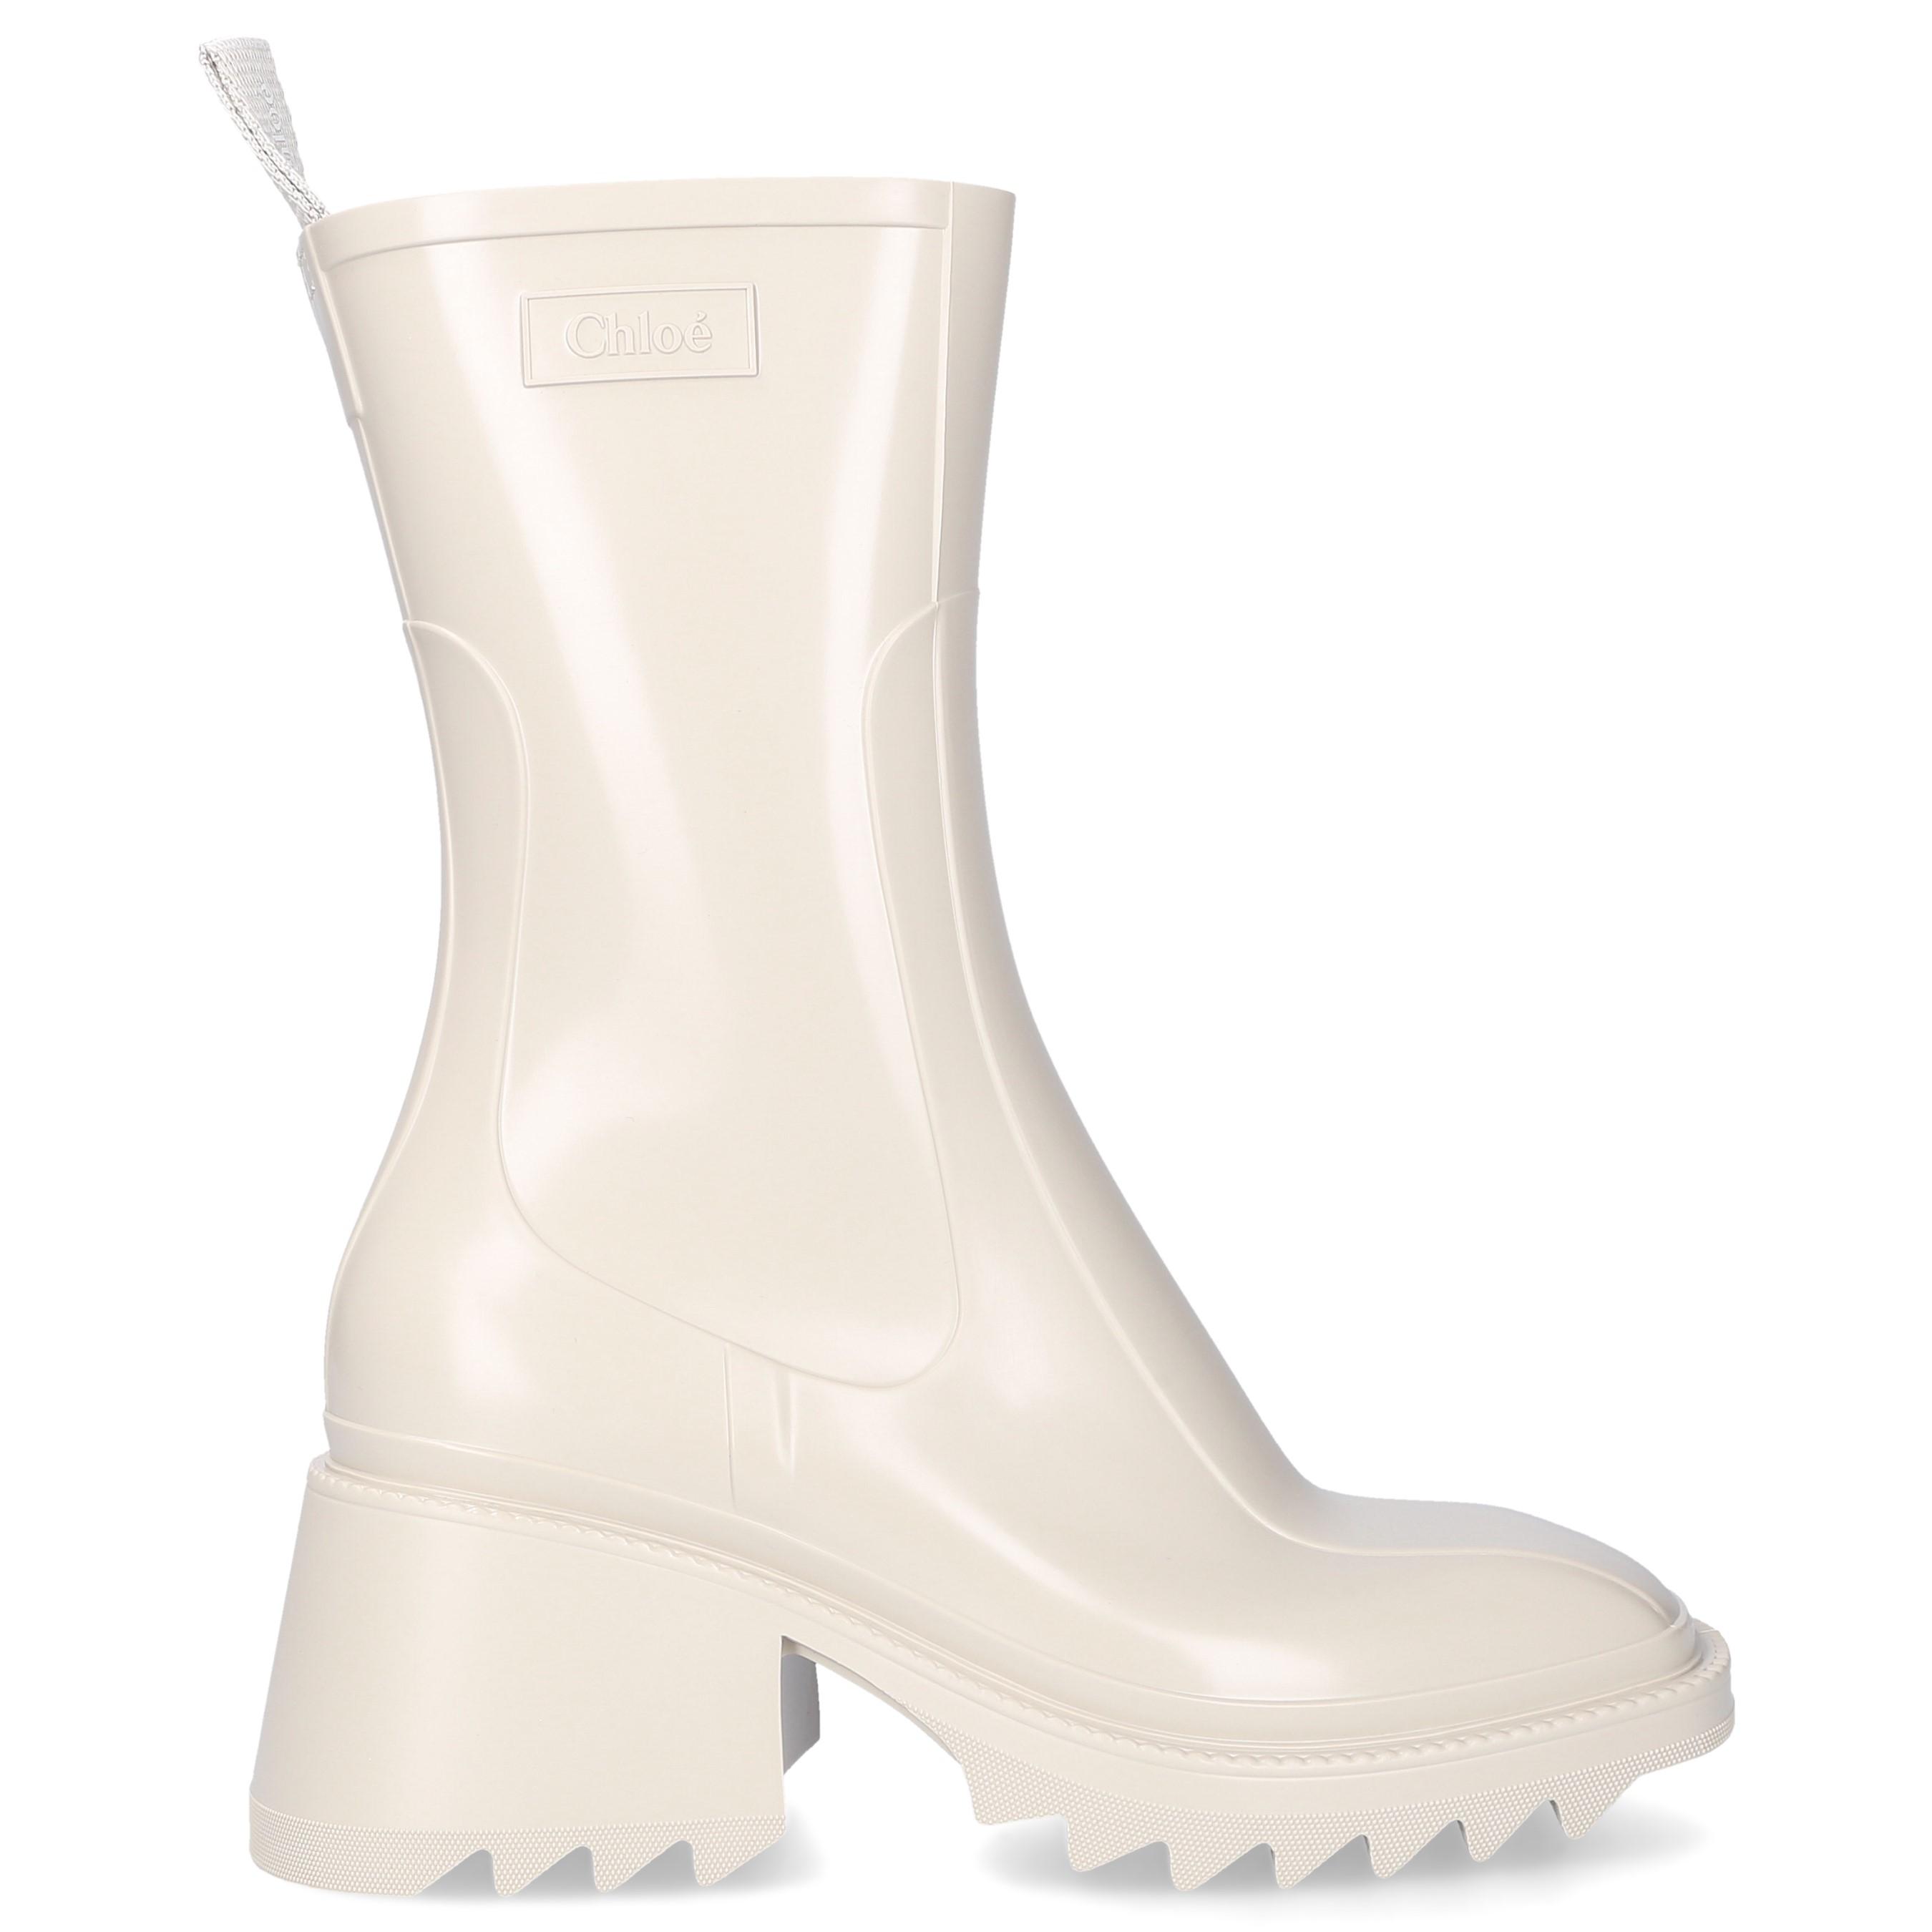 Chloé Rain Boots Betty in Beige (Natural) - Lyst